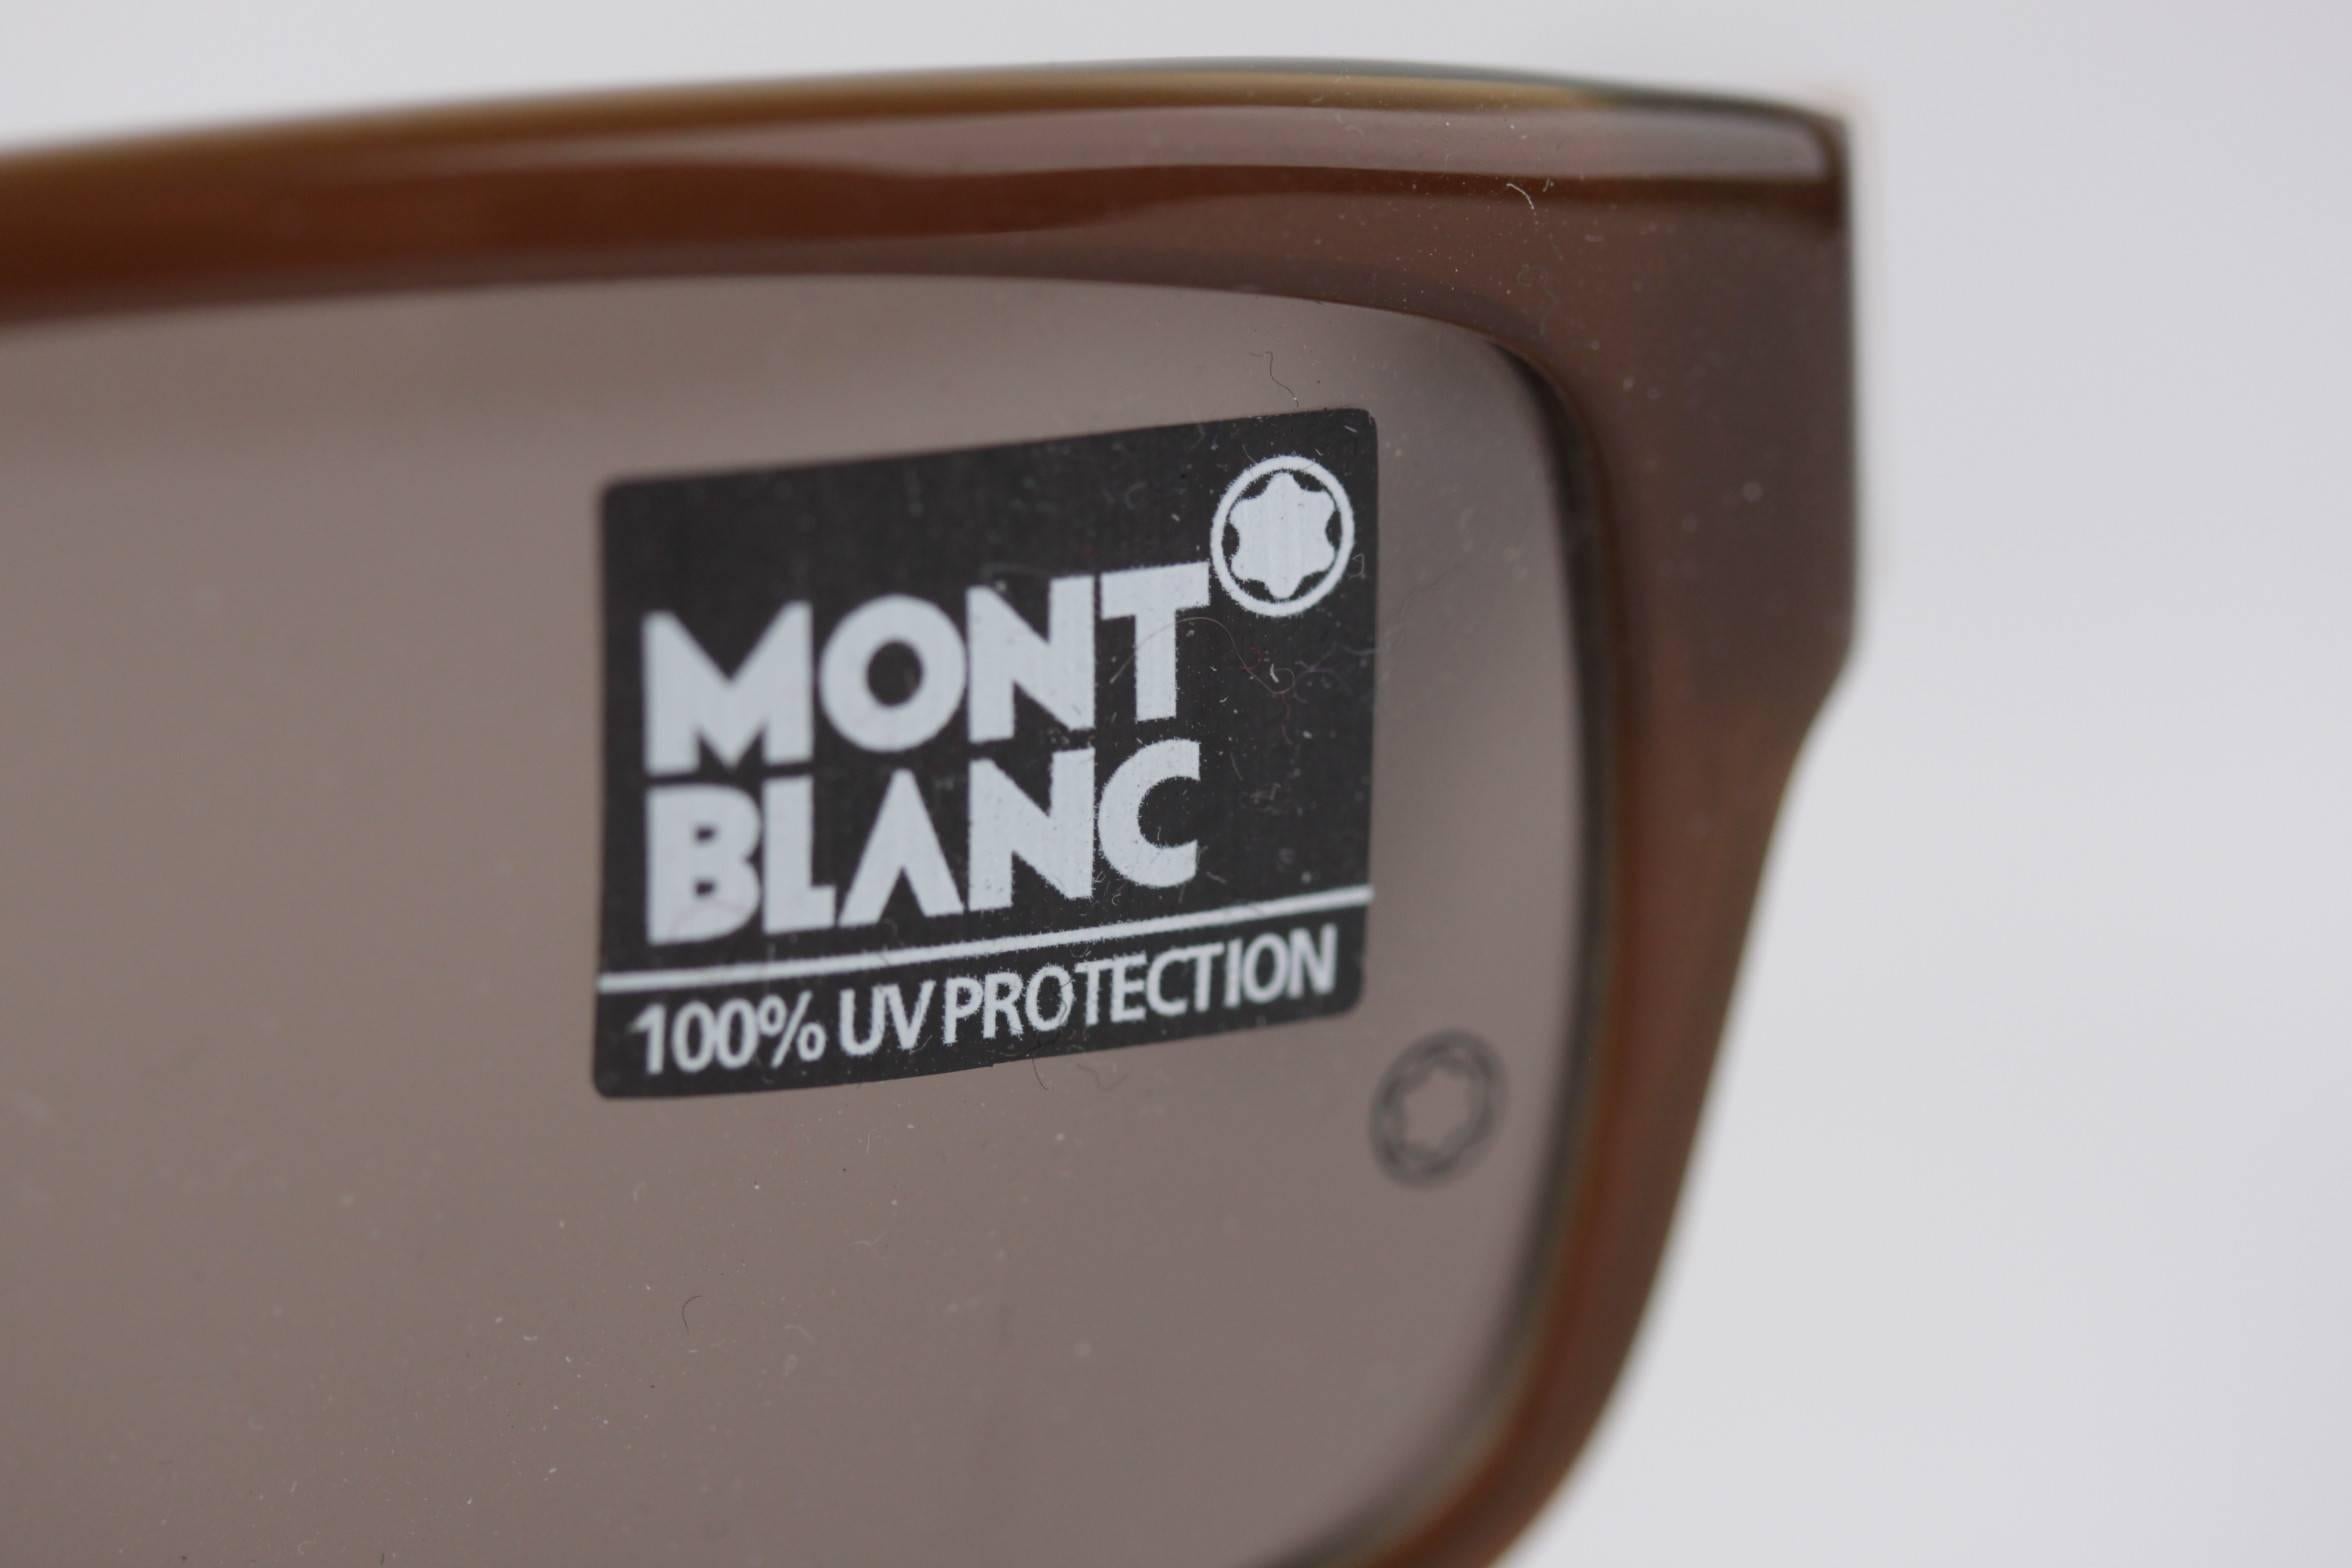 - rectangular-shaped sunglasses, signed MONTBLANC (Made in Italy)

- original lMONTBLANC lens (w/ MONTBLANC logo)

- 100% UV protection

- Brown color on the front / Military Green color internally

- Gold metal accents

- MONTBLANC signatures on